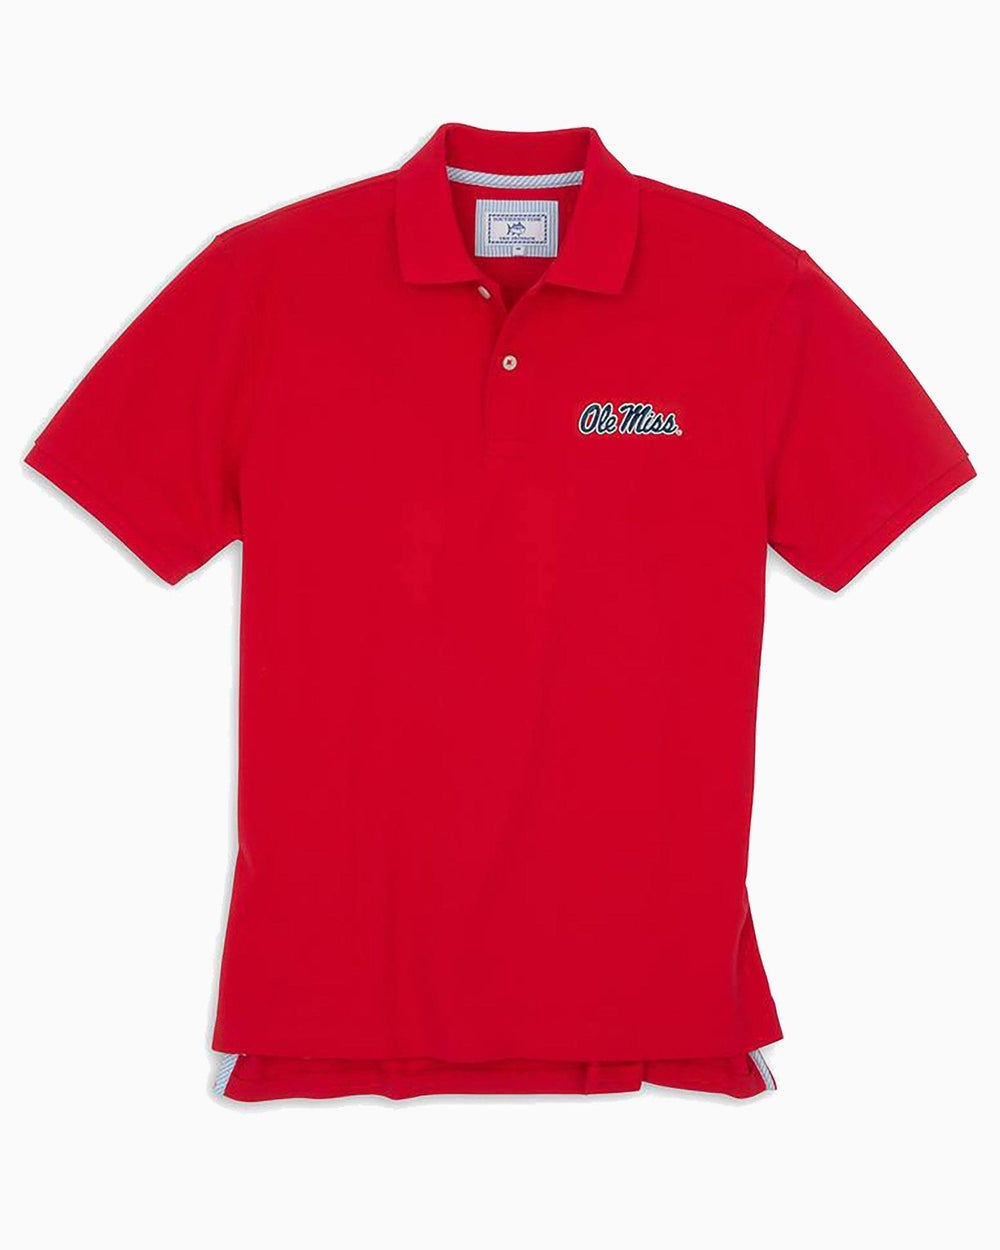 The front view of the Men's Red Ole Miss Pique Polo Shirt by Southern Tide - Varsity Red